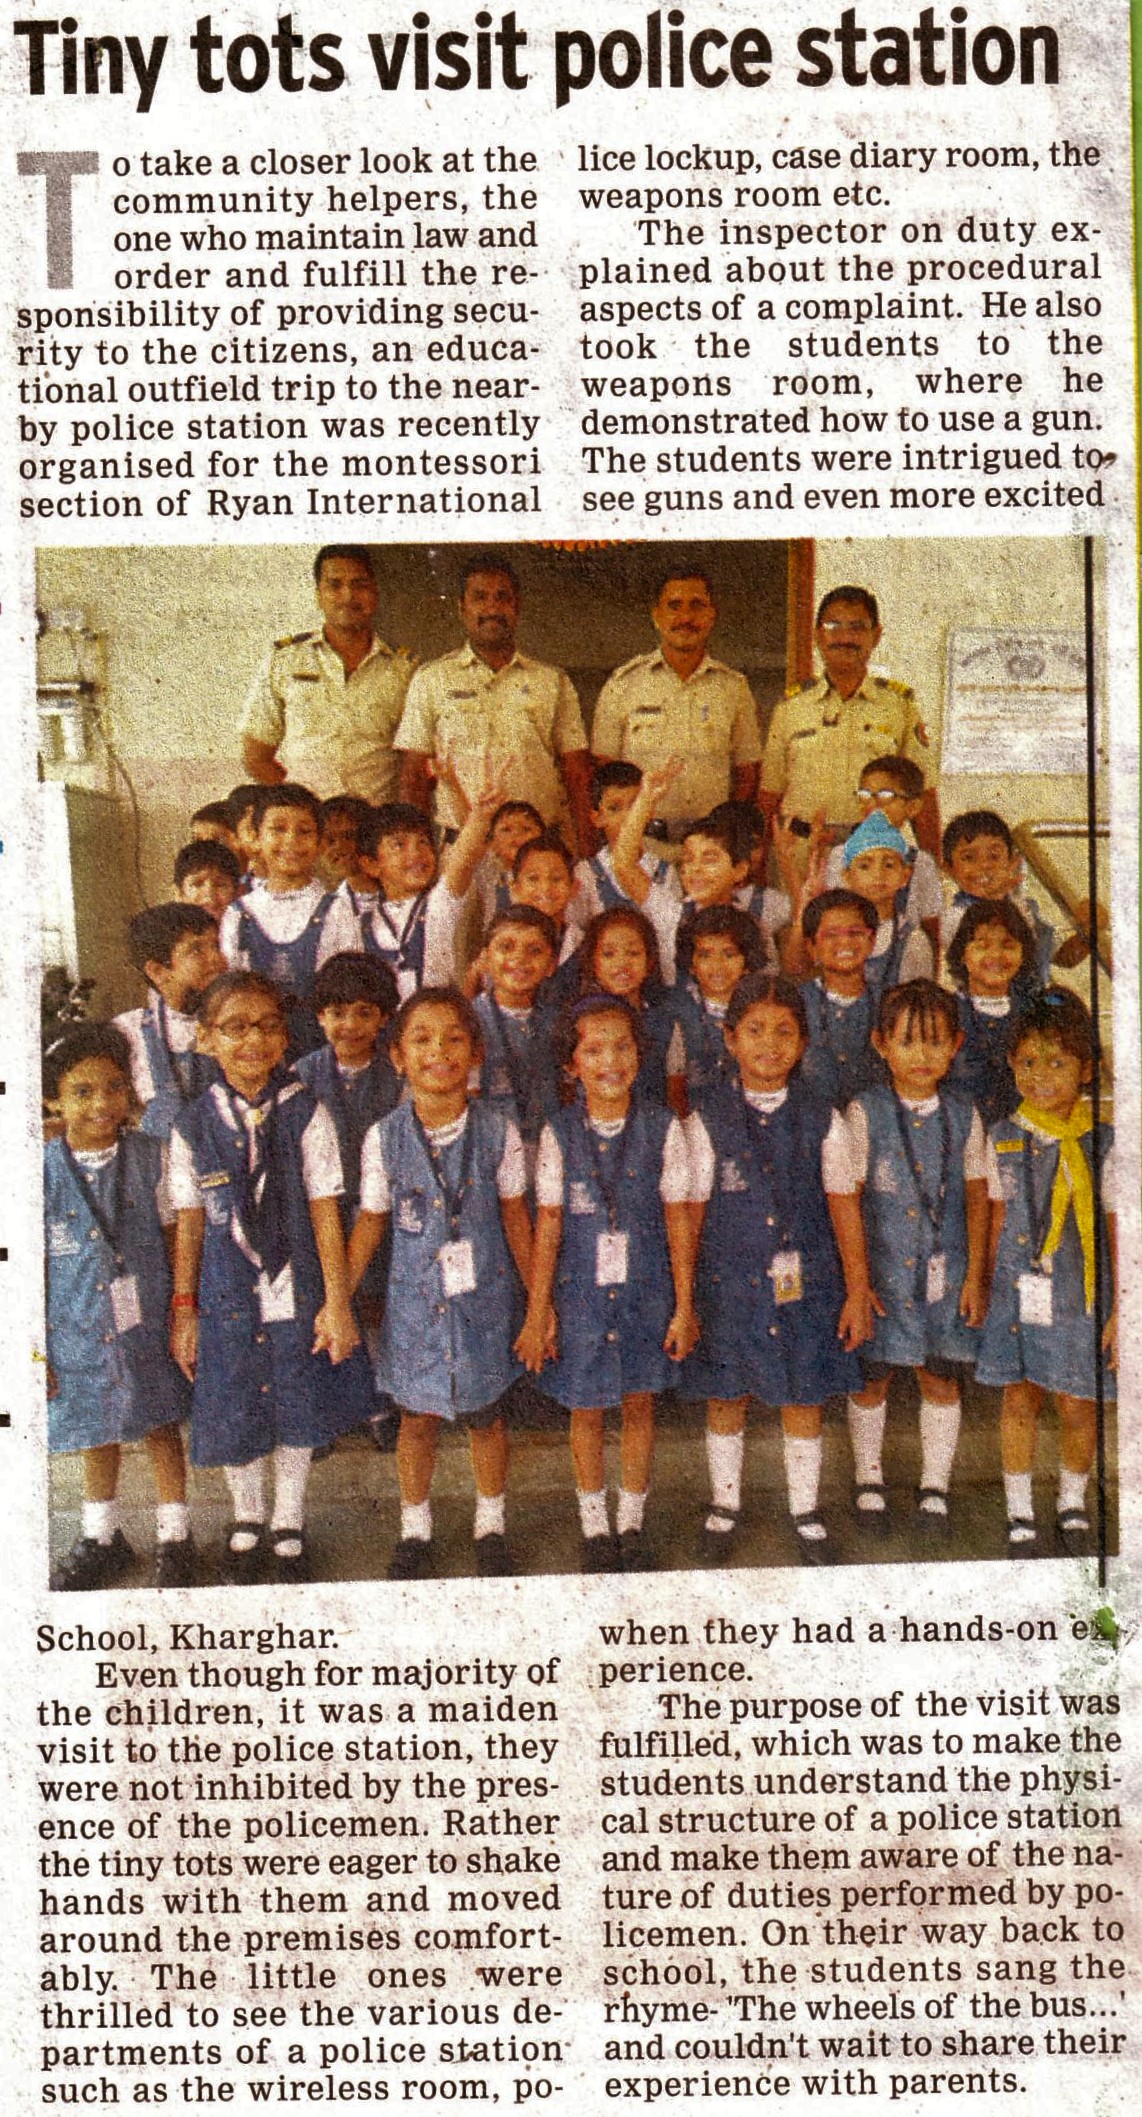 Tiny tots visit Police station was mentioned in News band - Ryan International School, Kharghar - Ryan Group